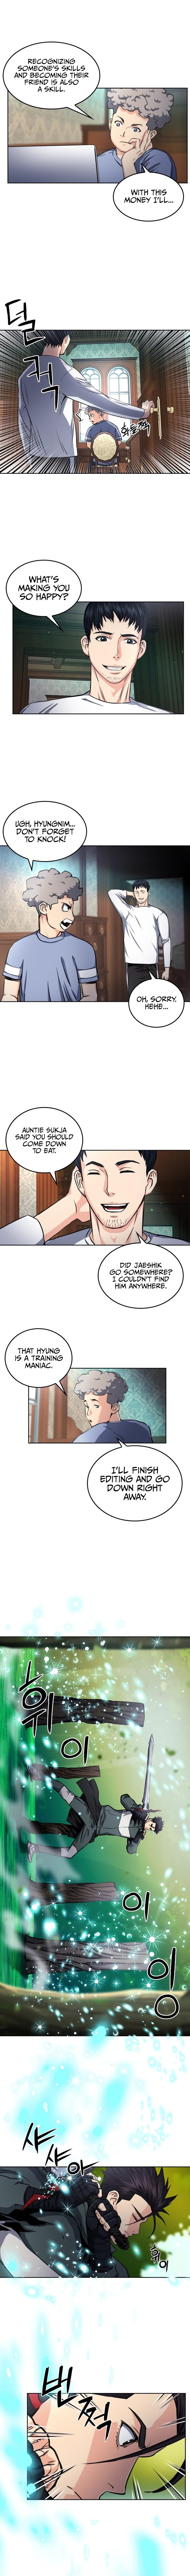 Seoul Station Druid - Chapter 55 Page 6